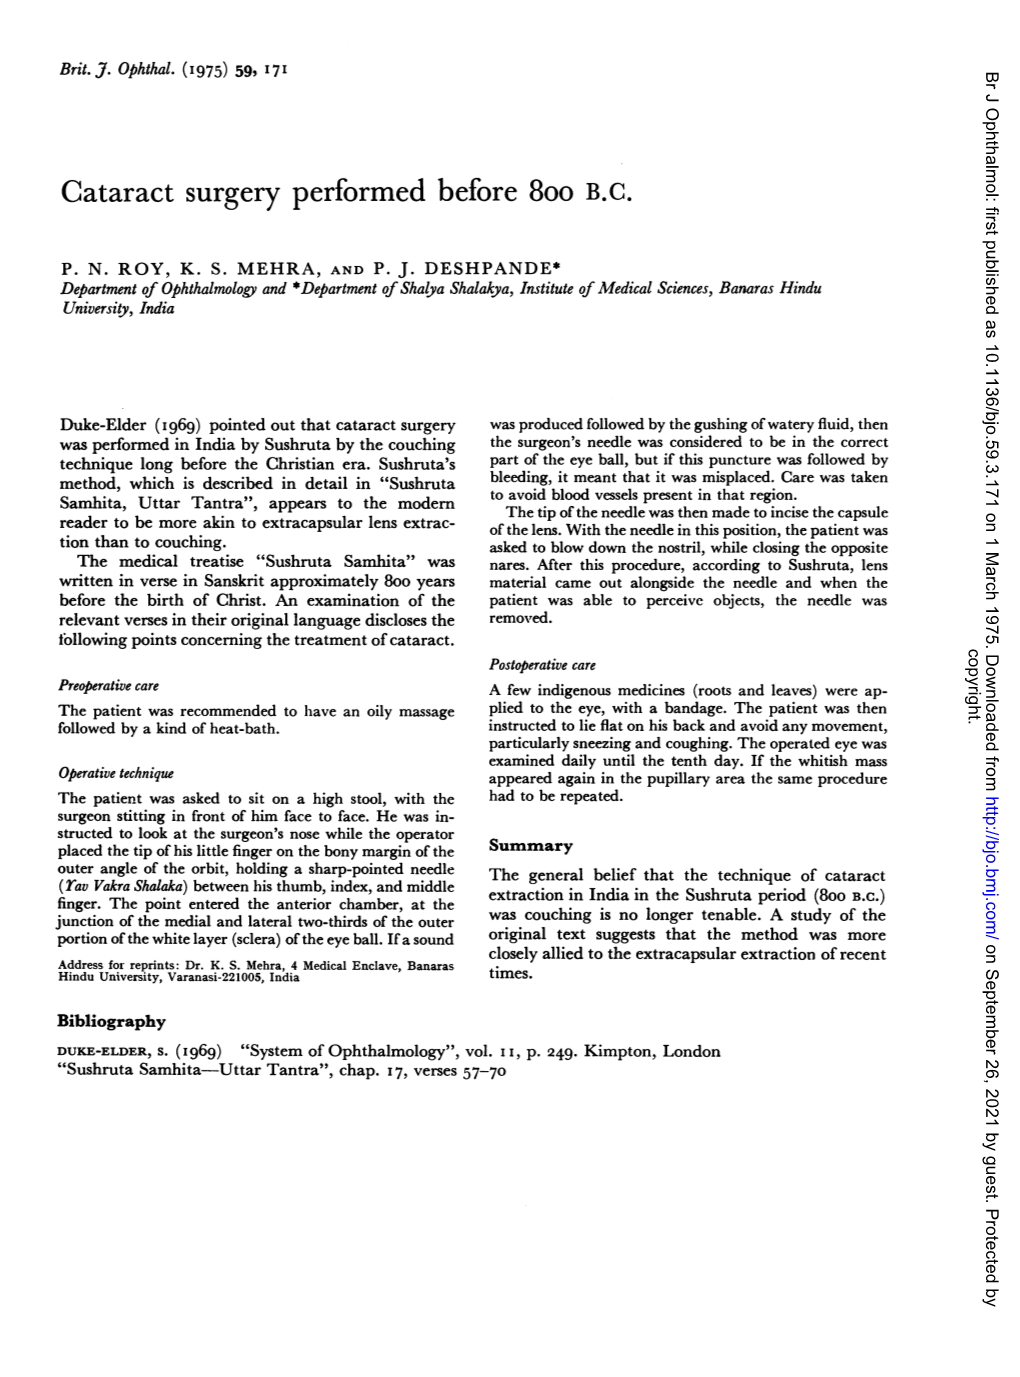 Cataract Surgery Performed Before 800 B.C